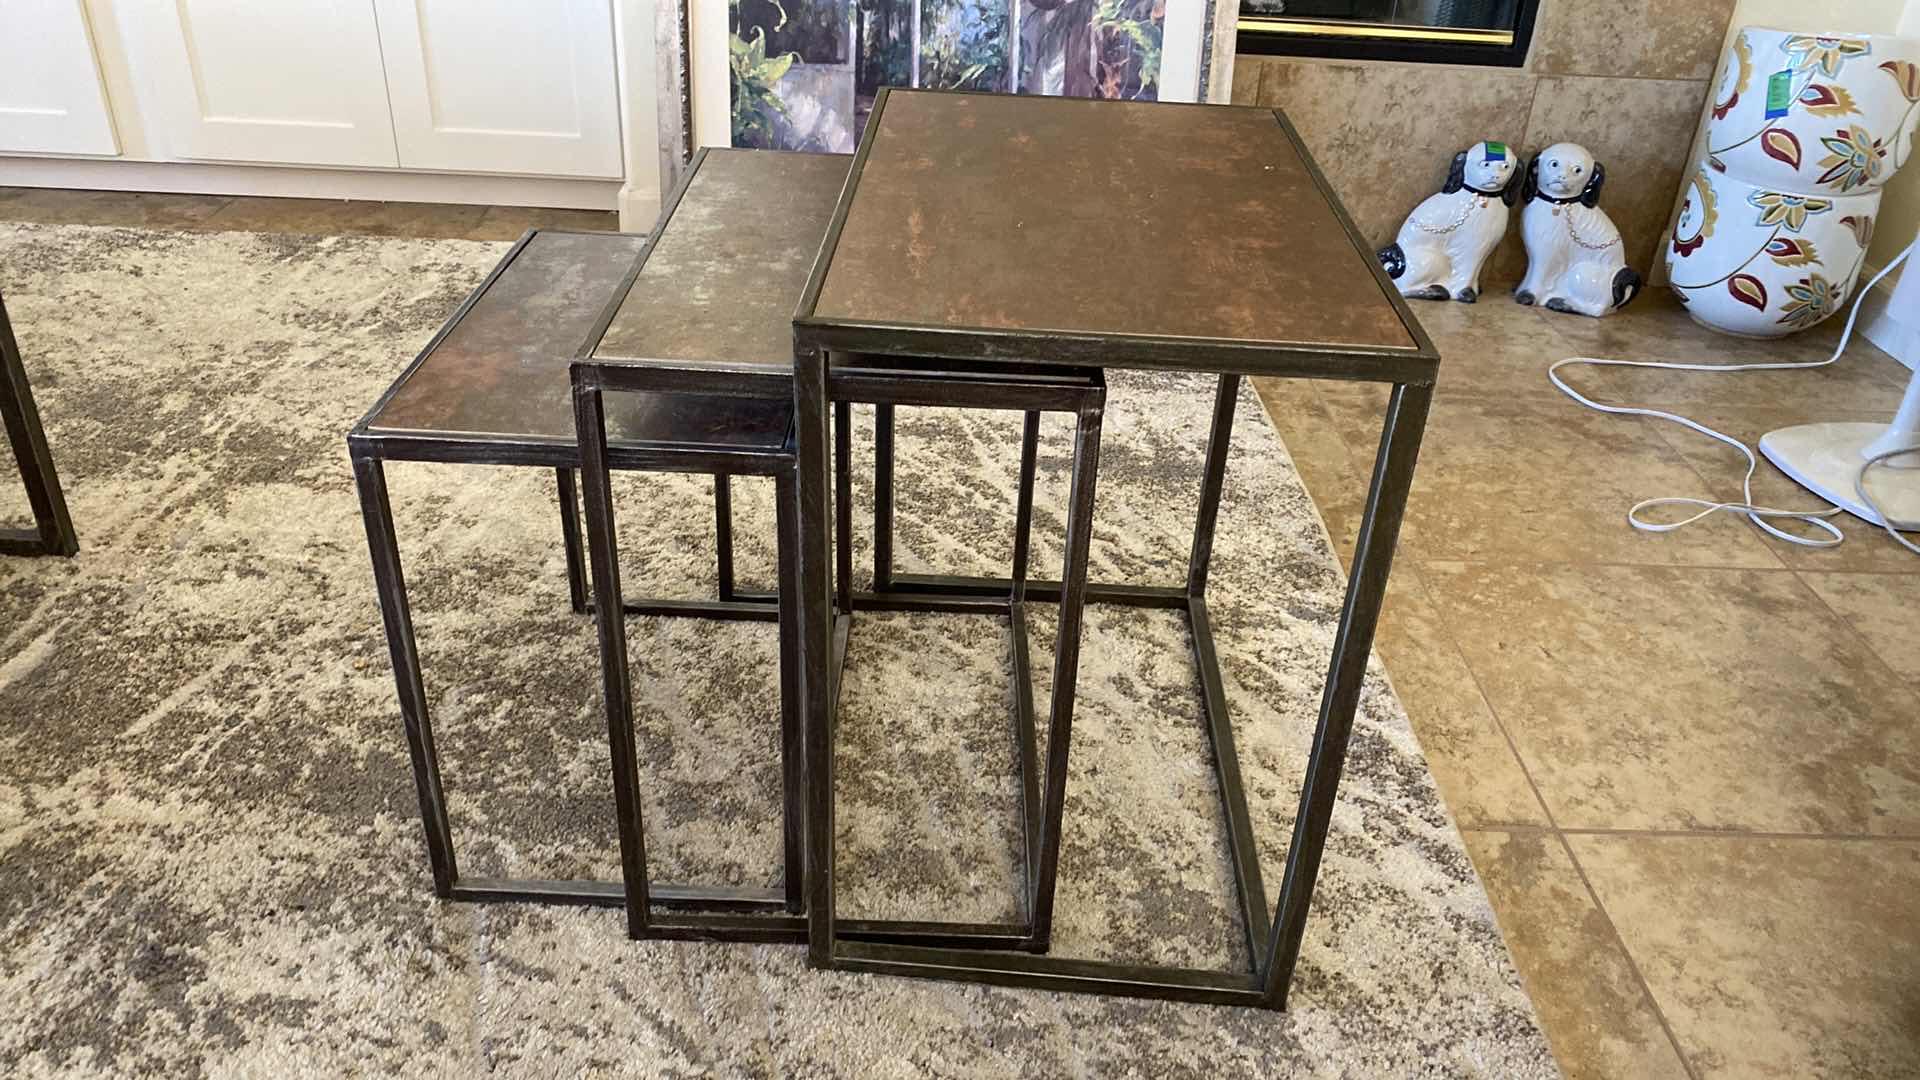 Photo 3 of 3 NESTING END TABLES FAMILY ROOM LARGEST 24 1/2” x 16” H 24”